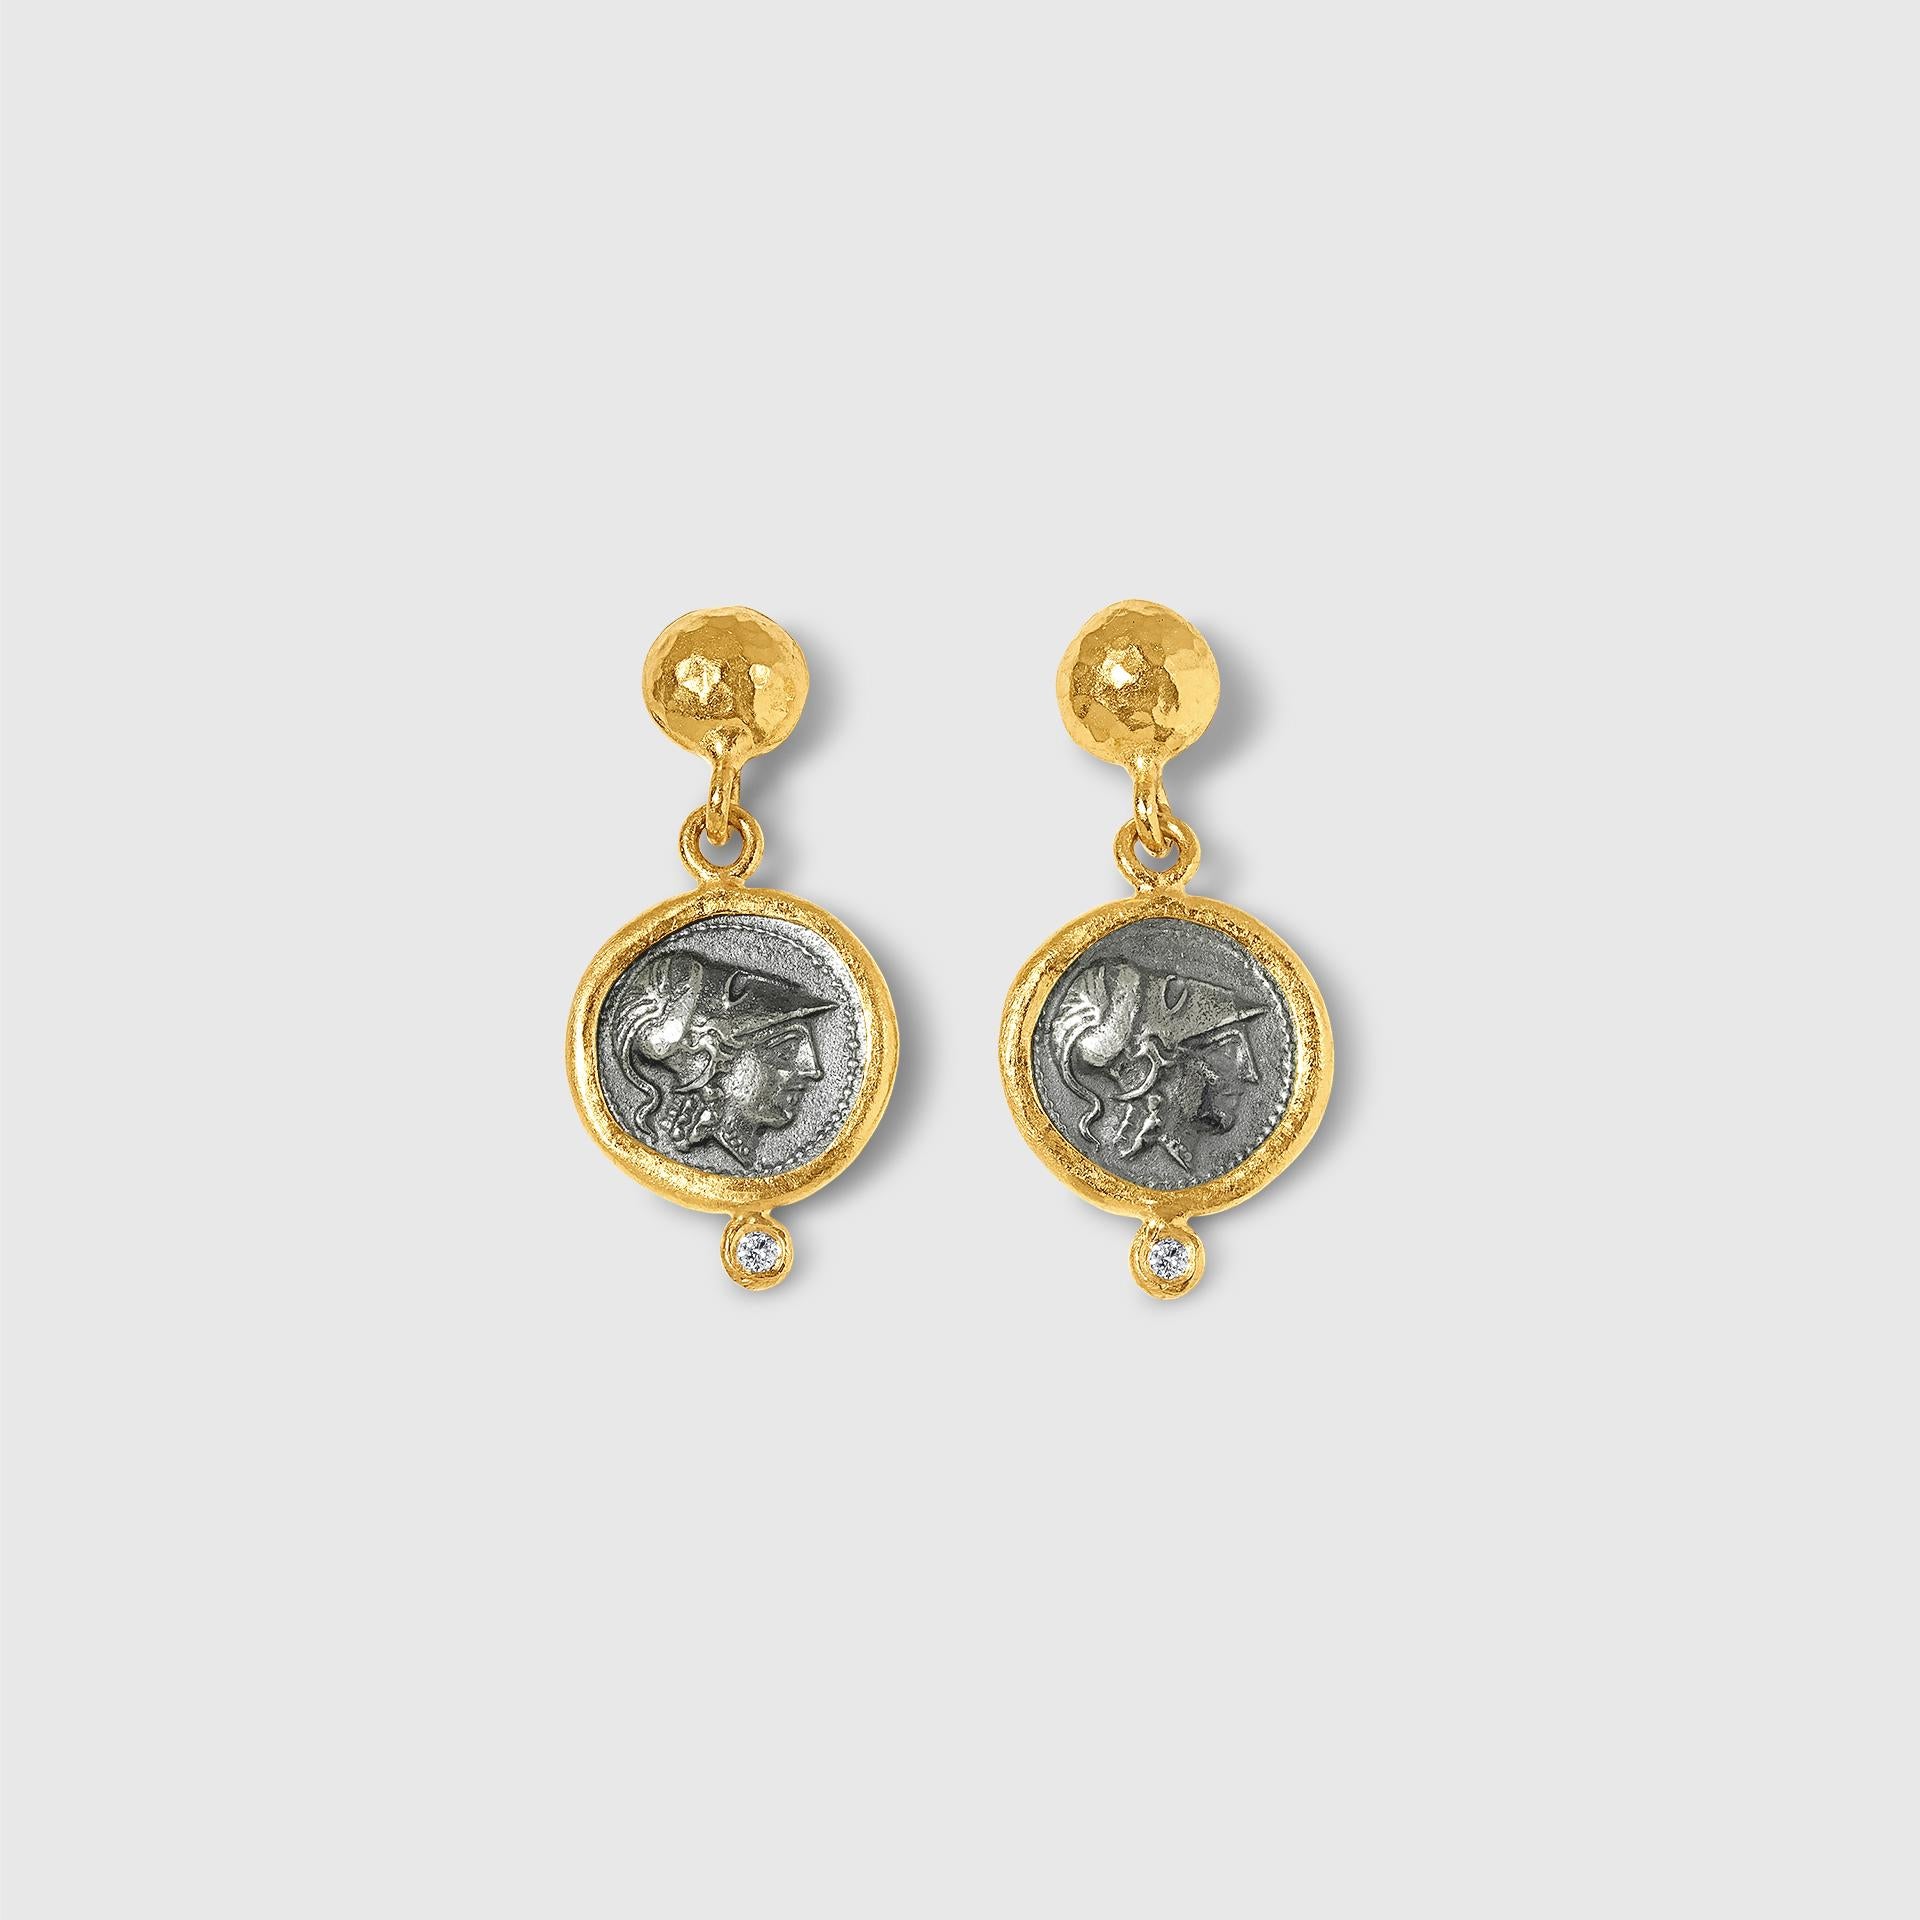 Athena Earrings with Diamond Detail, in 24kt Gold and Sterling Silver by Prehistoric Works of Istanbul, Turkey. Length: 23mm (.9